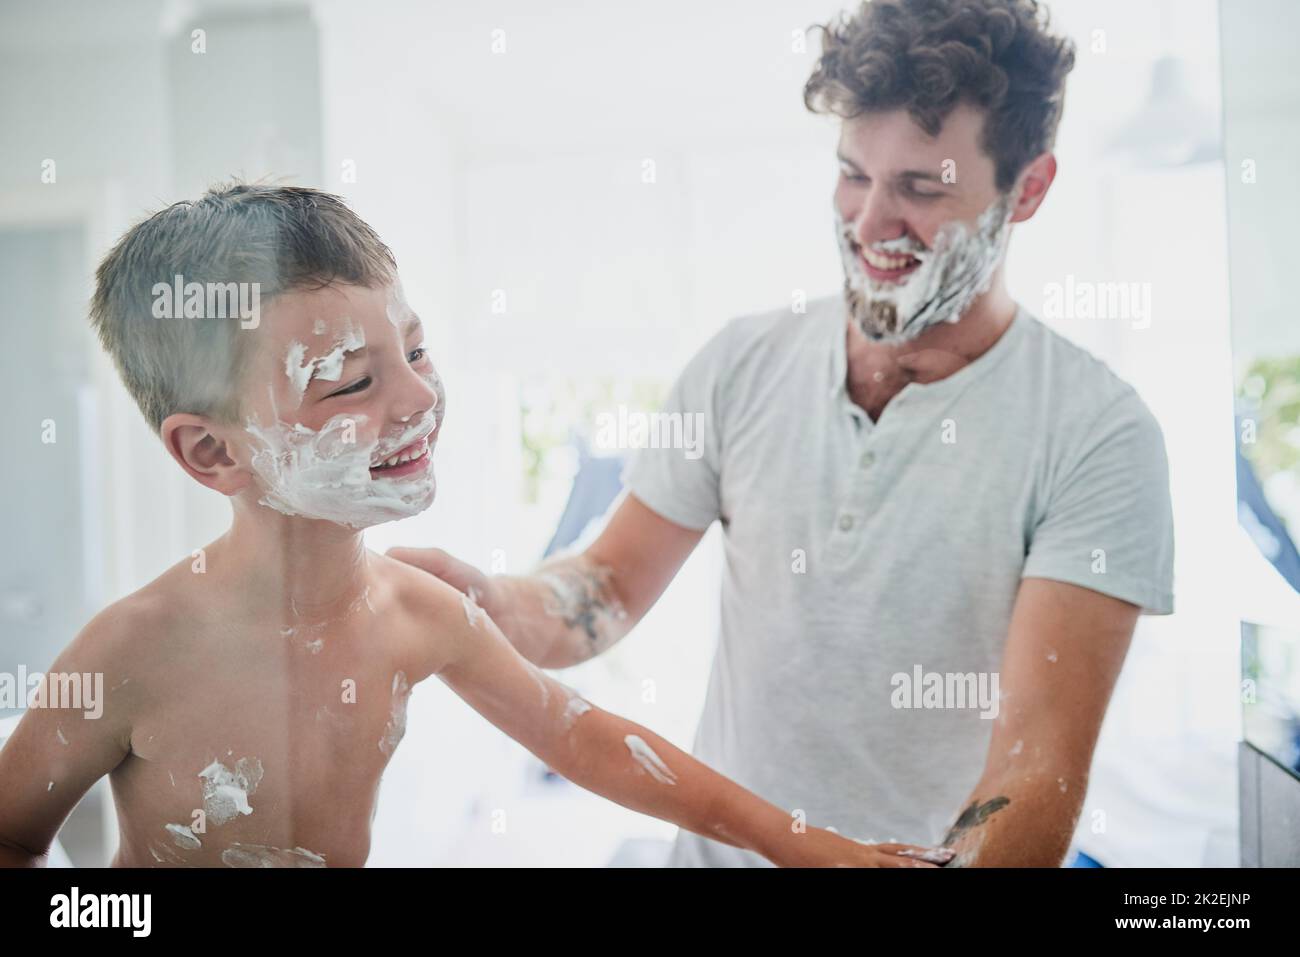 When it gets messy, it gets fun. Shot of a father teaching his little son how to shave in the bathroom at home. Stock Photo